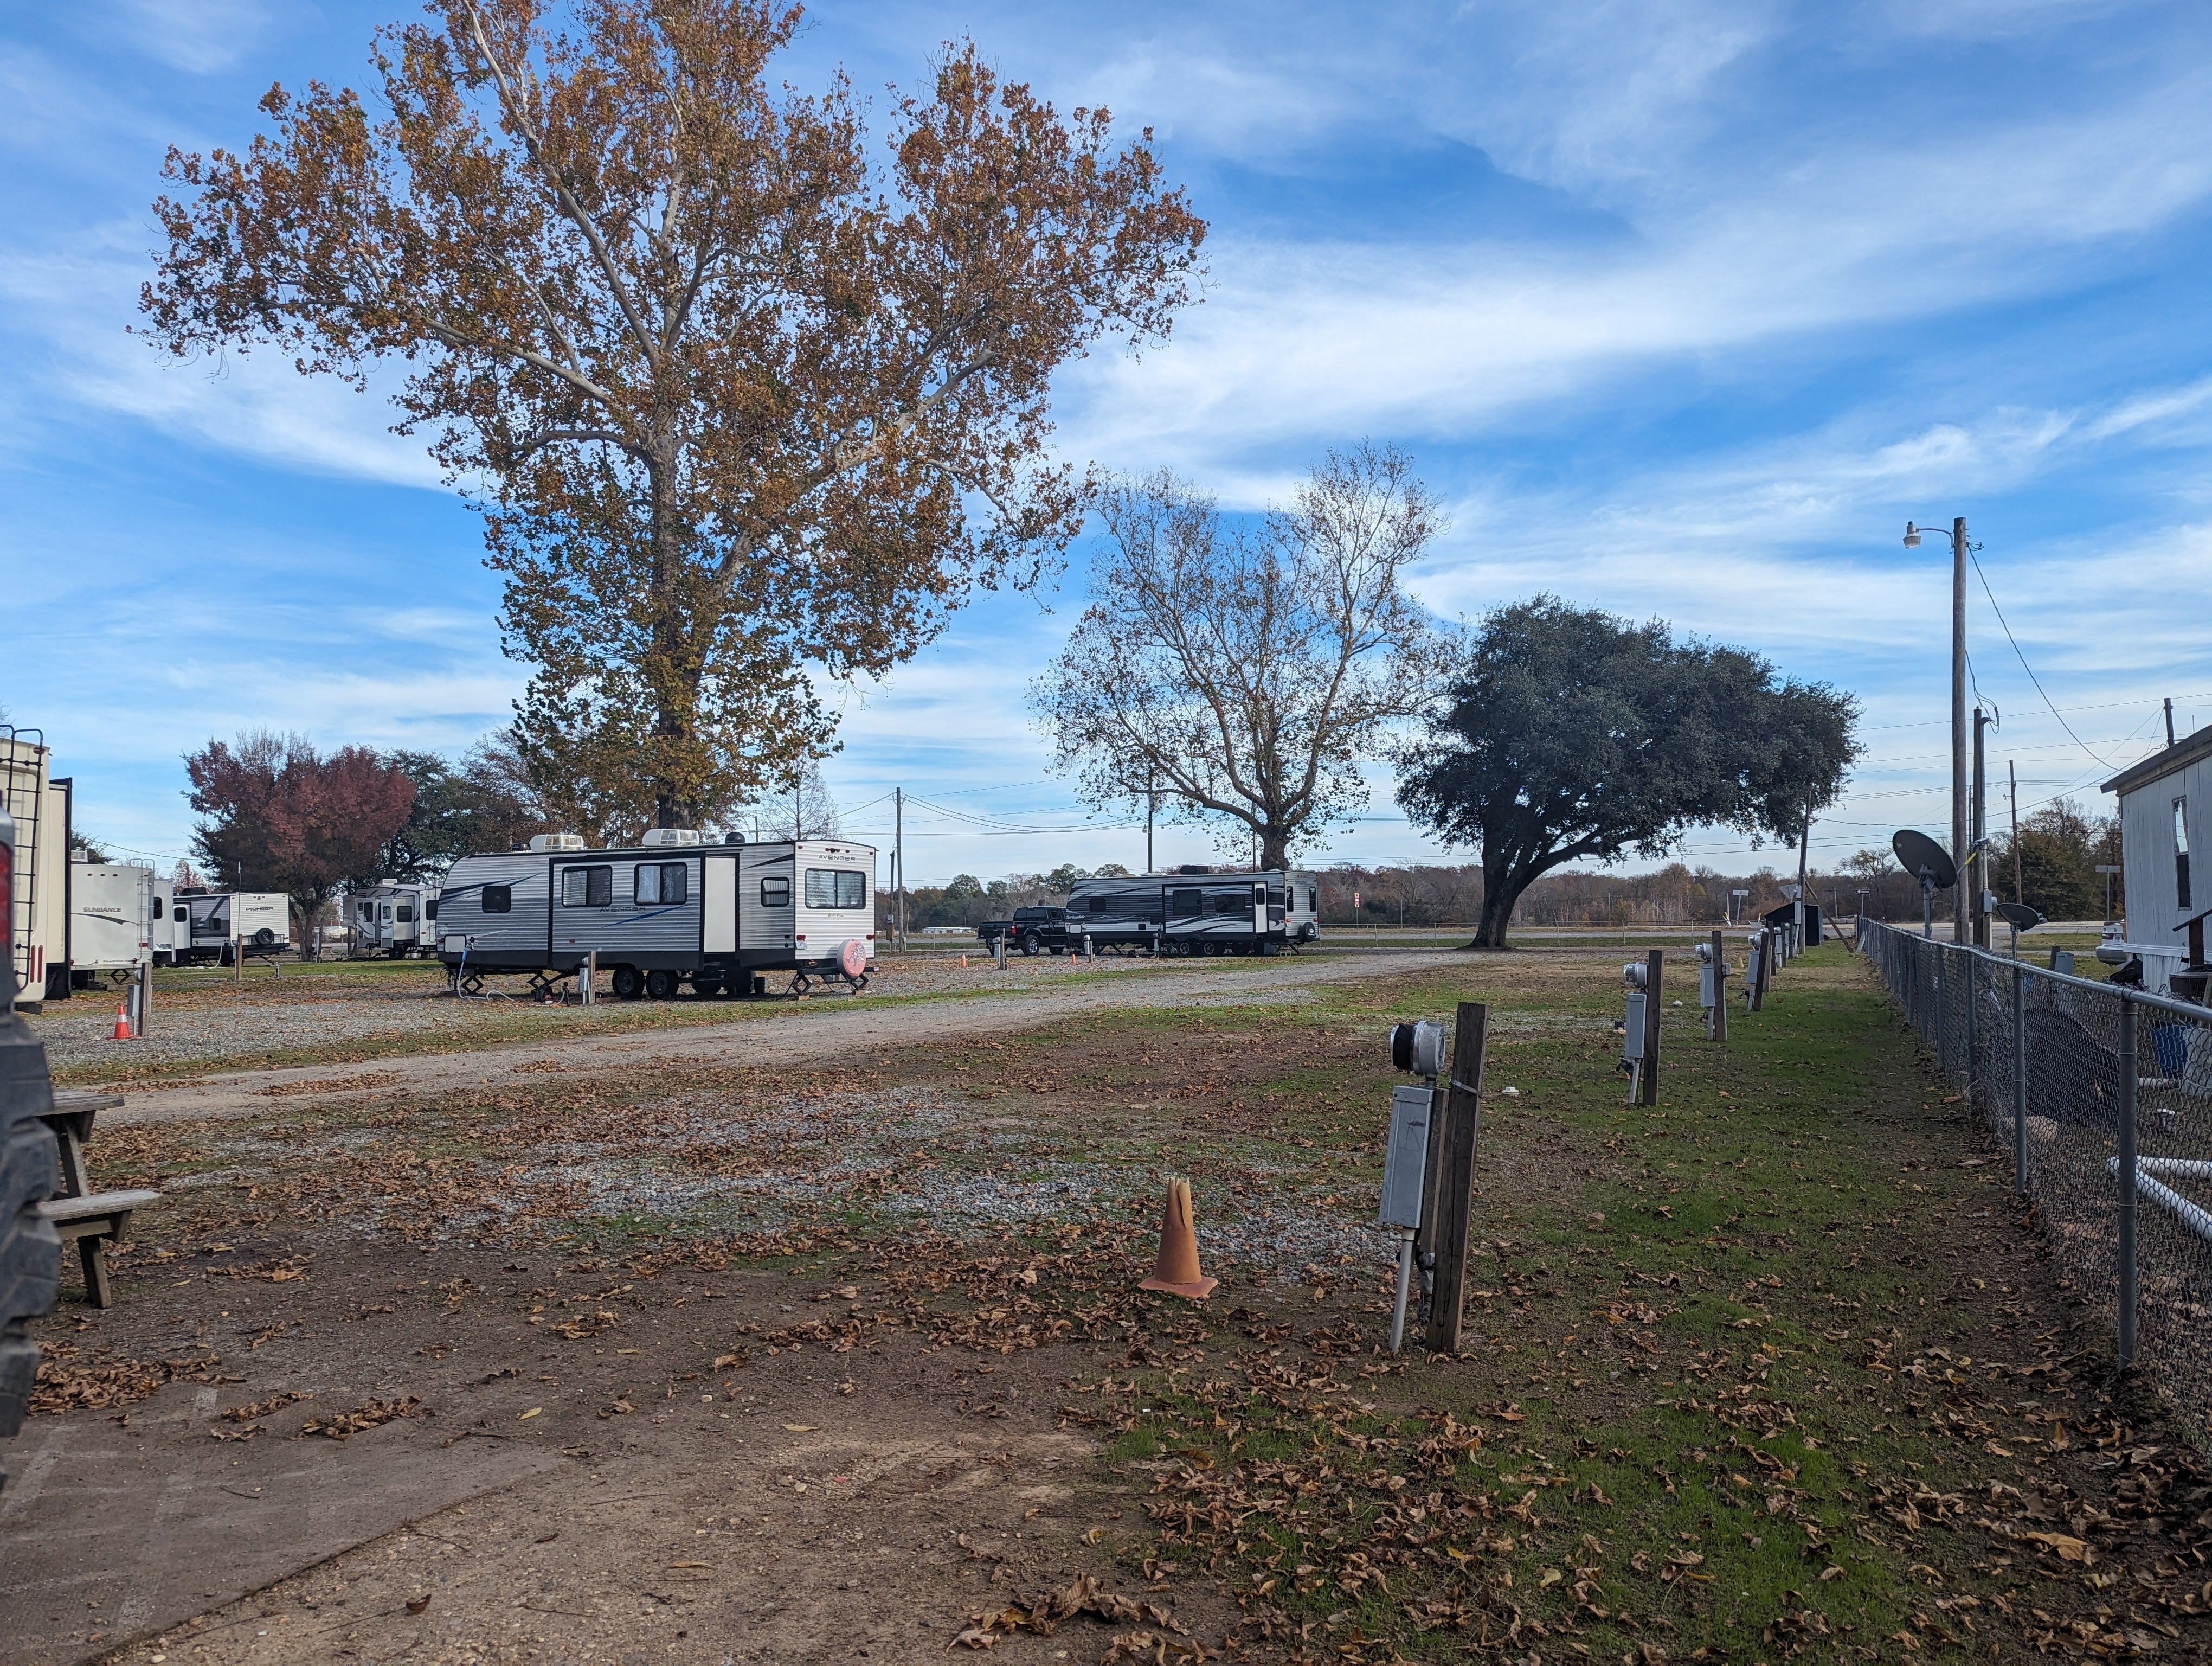 Camper submitted image from Bayou Boeuf RV Park - 1